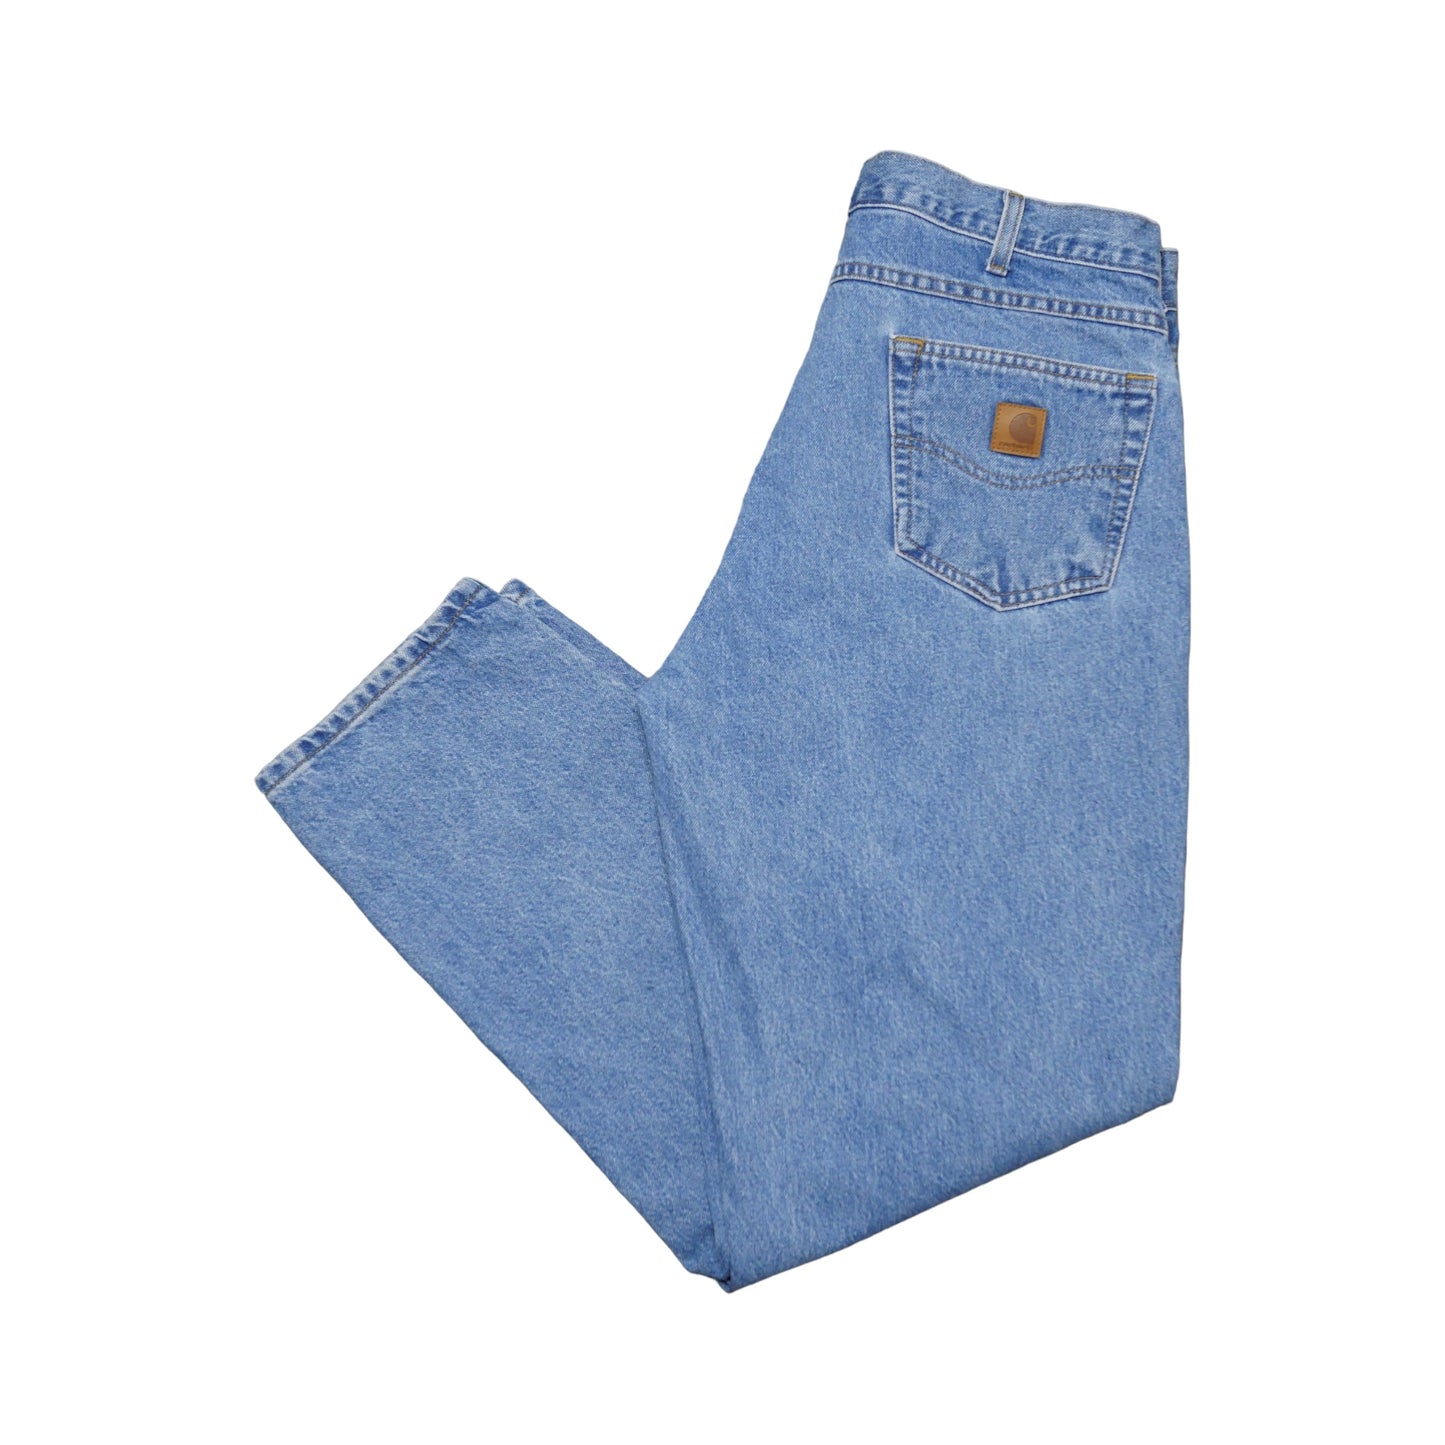 Carhartt Relaxed Fit Denim Jeans - 36